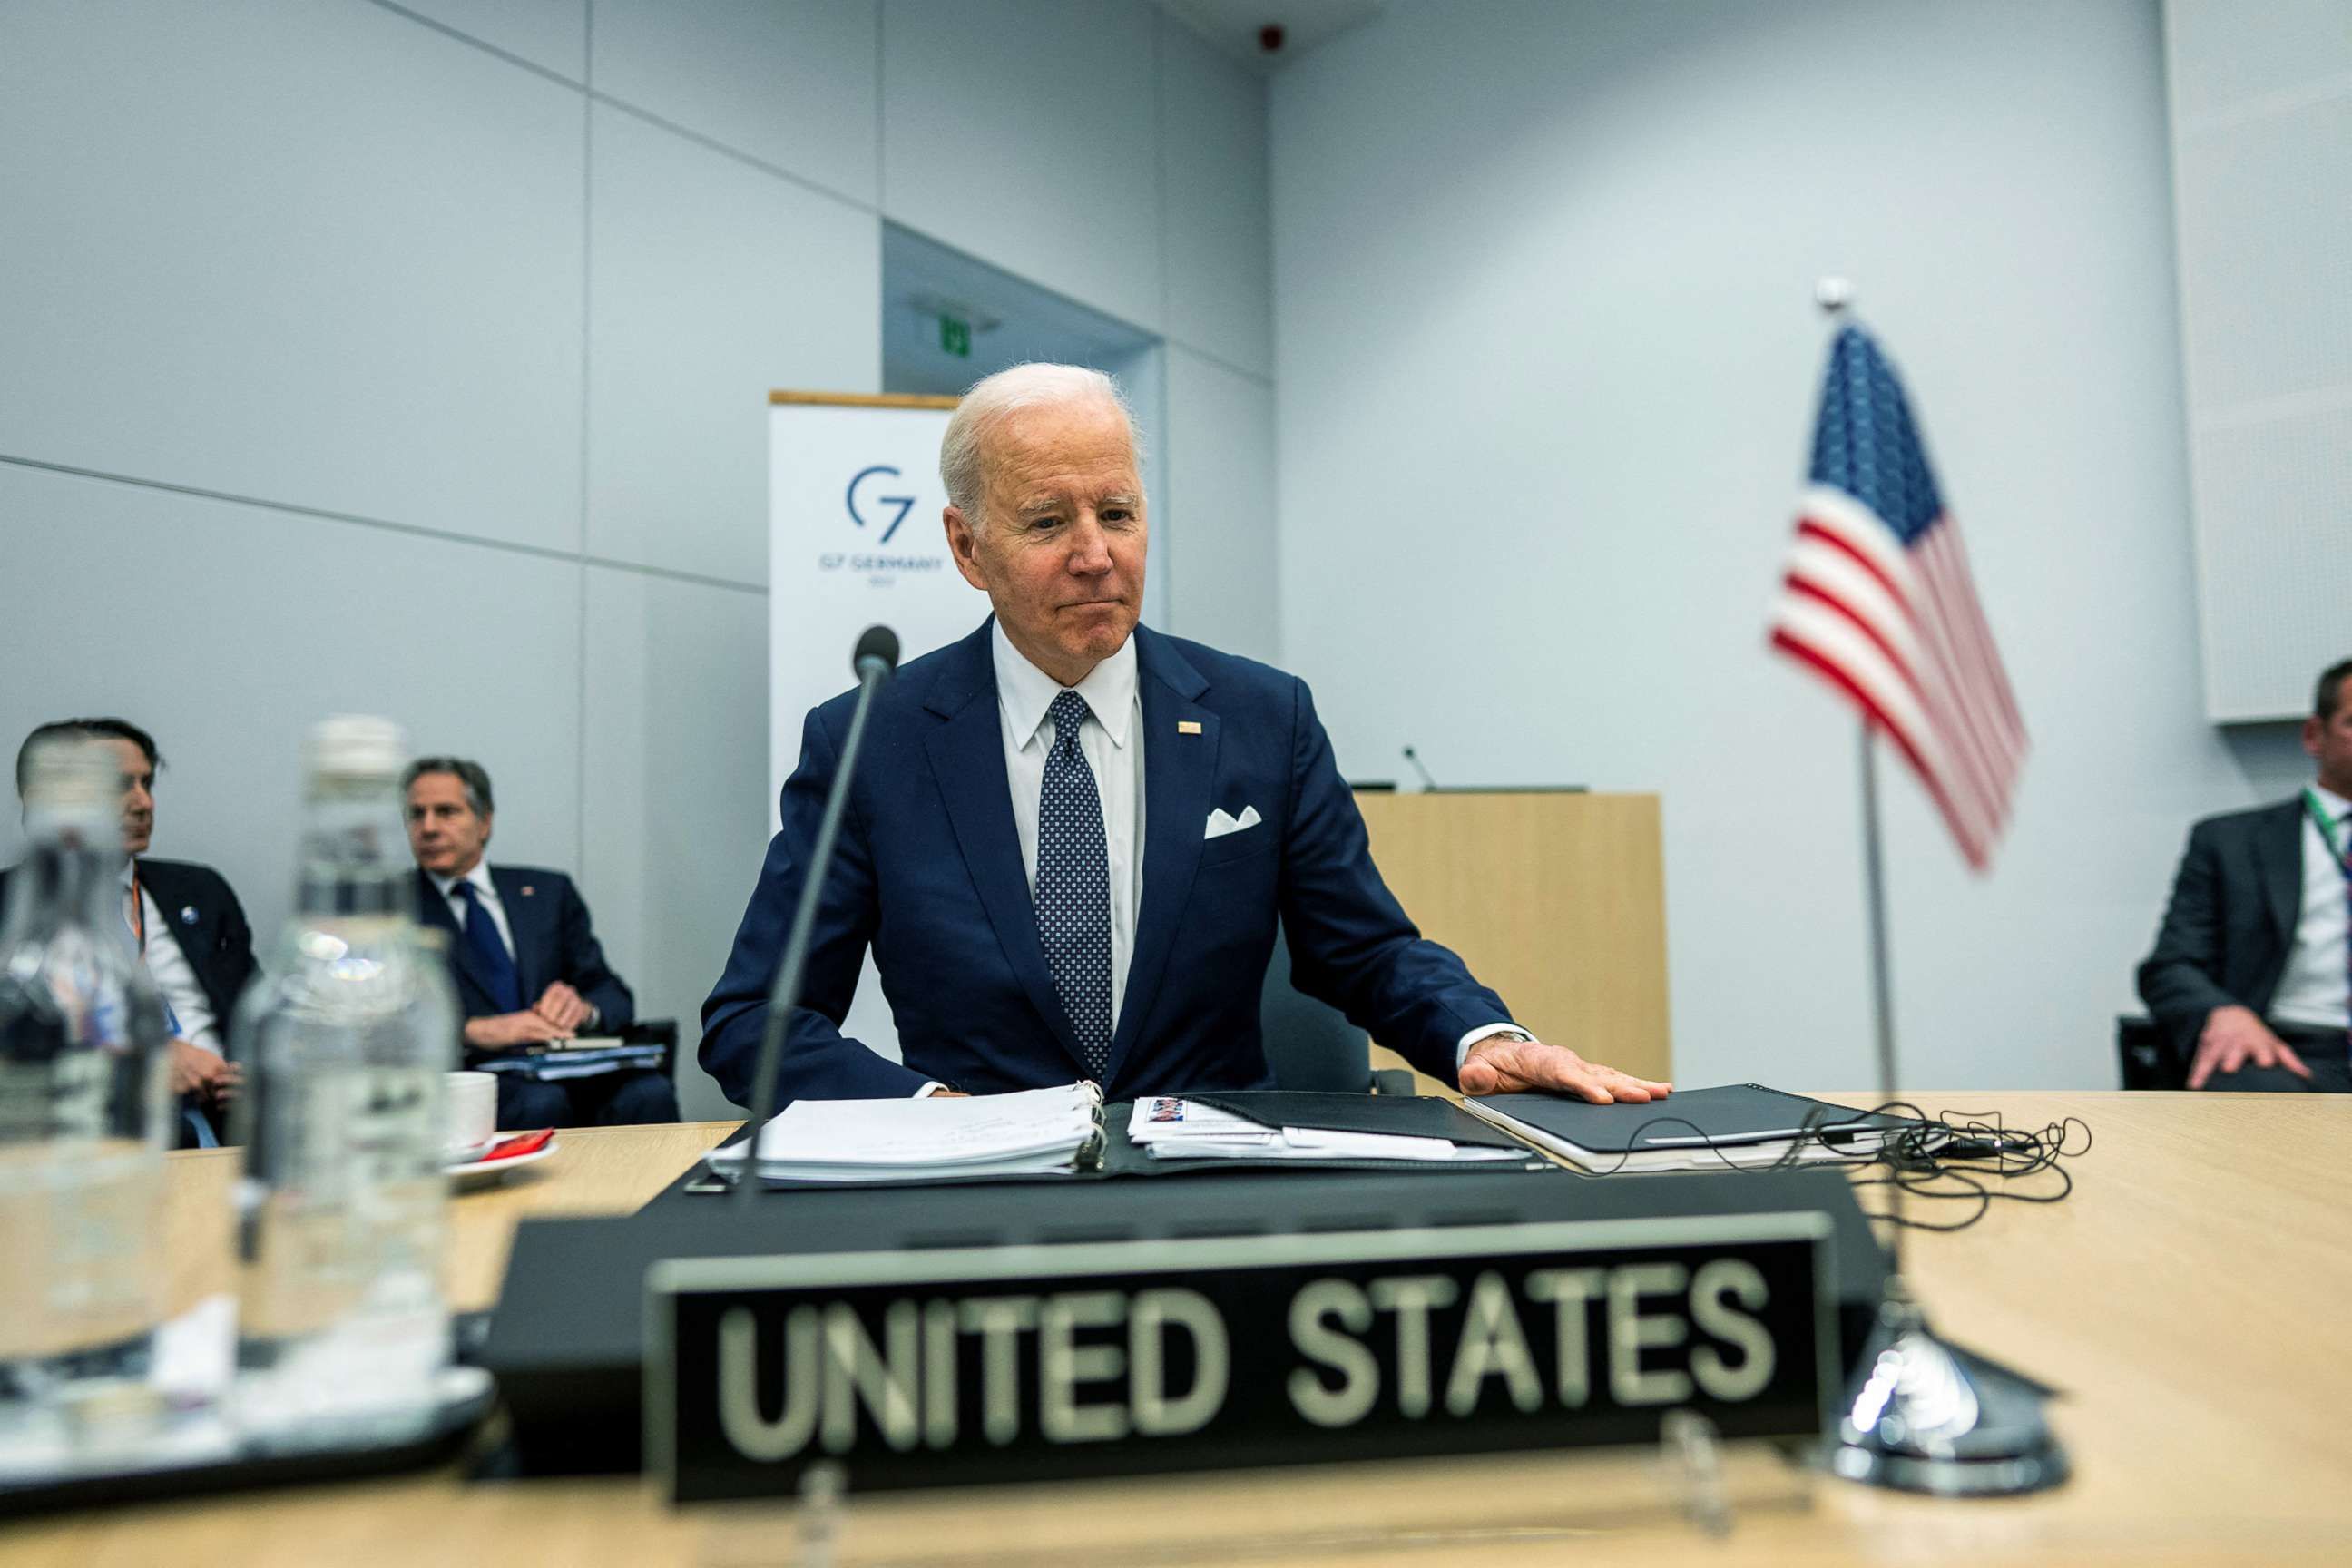 PHOTO: President Joe Biden takes his seat to begin the meeting of G7 Leaders at NATO Headquarters in Brussels, Belgium, March 24, 2022. 